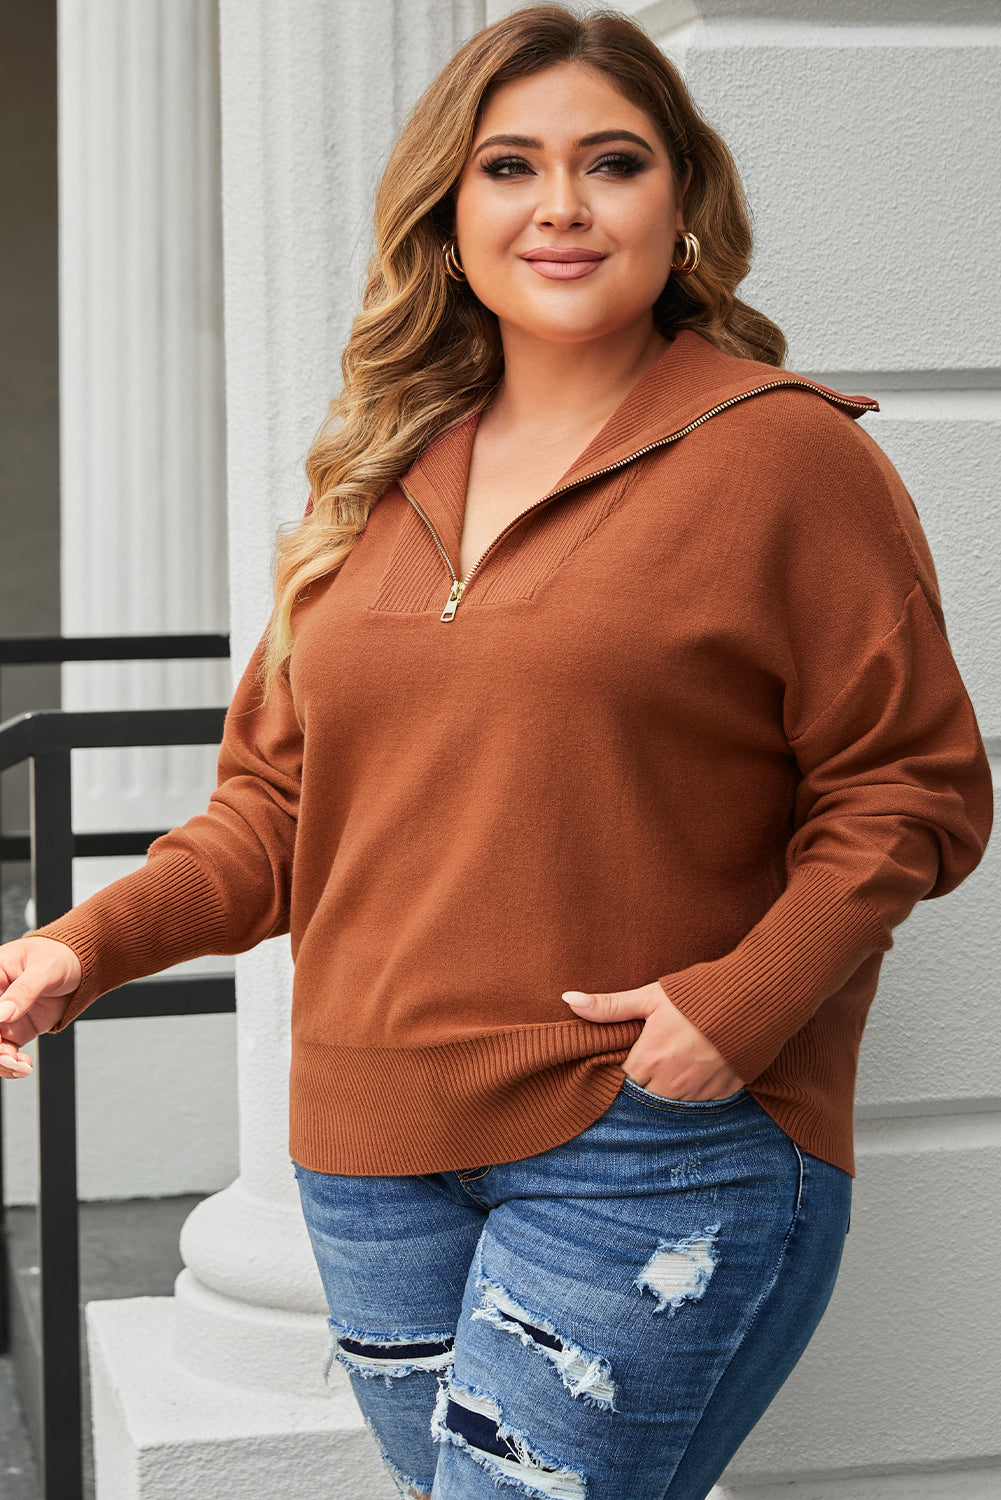 Rose Solid Ribbed Trim Plus Size Zip Collar Sweater